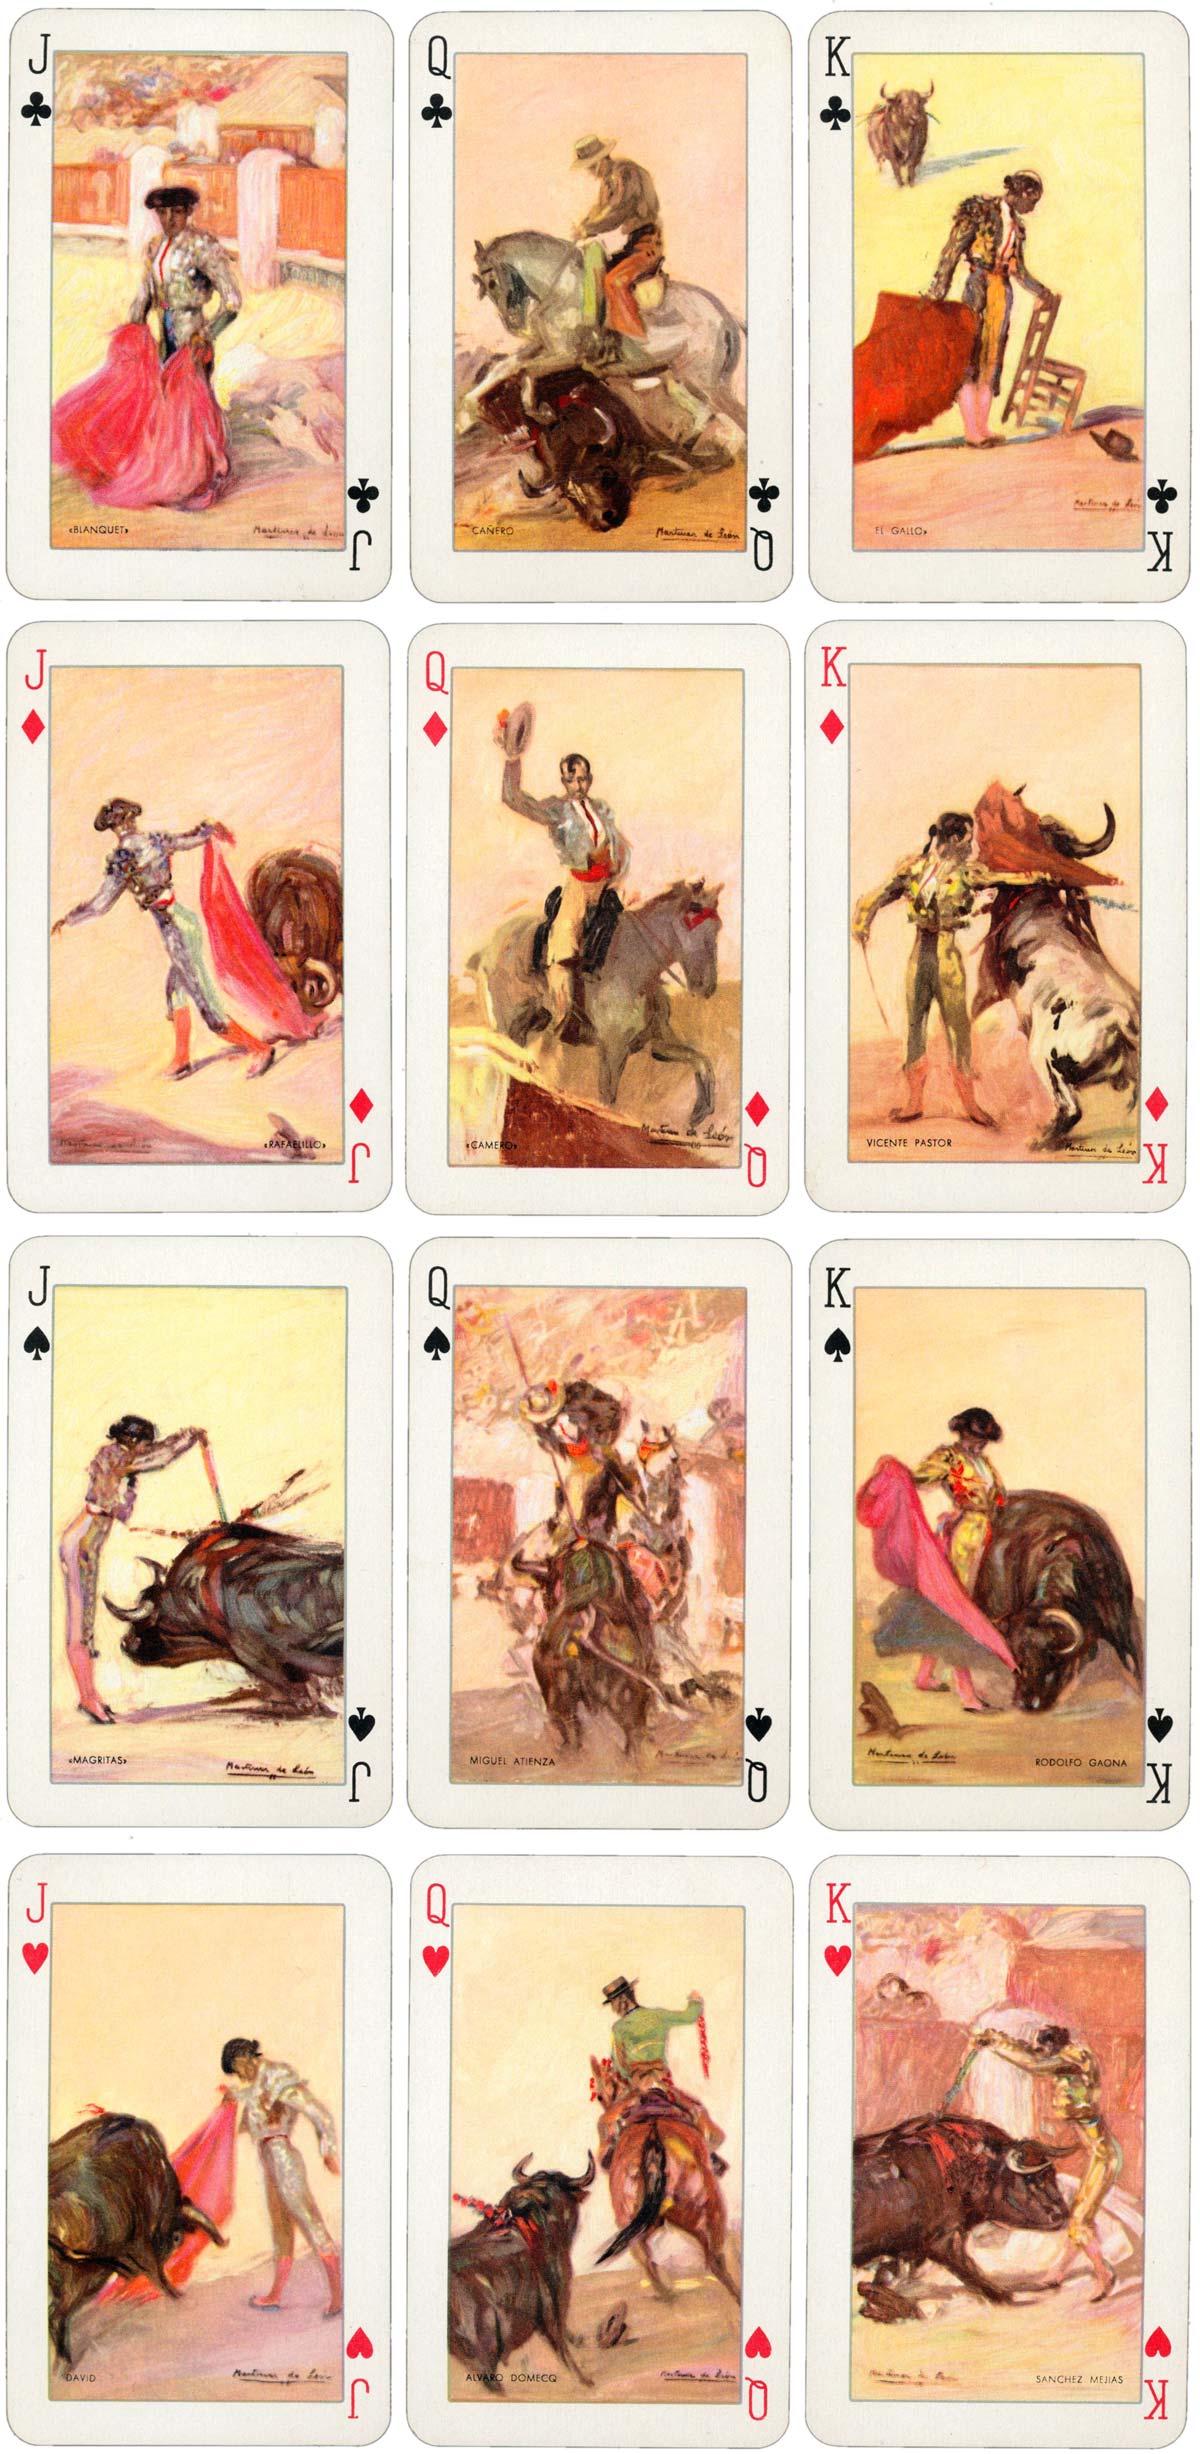 Bull-fighters pack published by Hijos de Heraclio Fournier, Vitoria (Spain) with artwork by Martínez de León, 1951